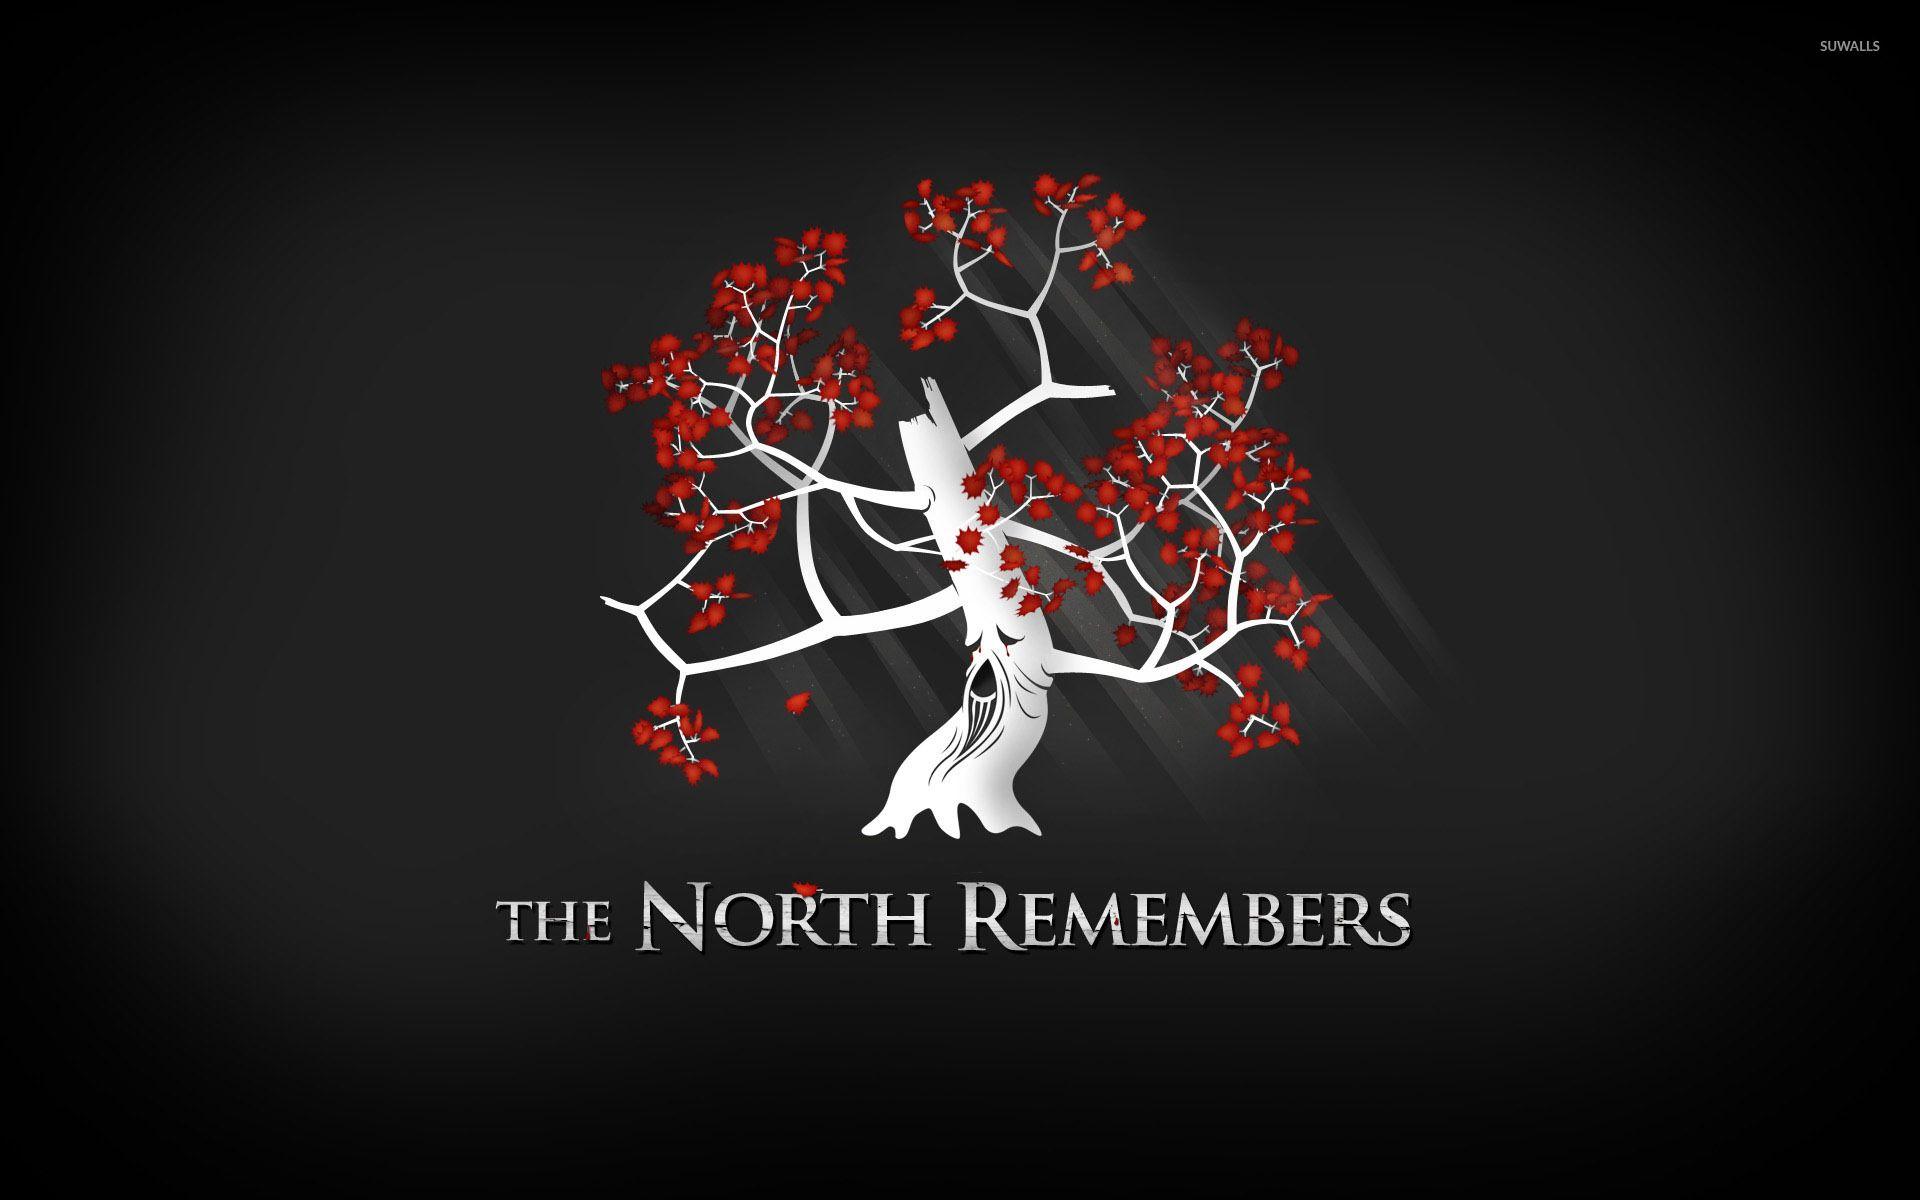 The North Remembers wallpaper Show wallpaper